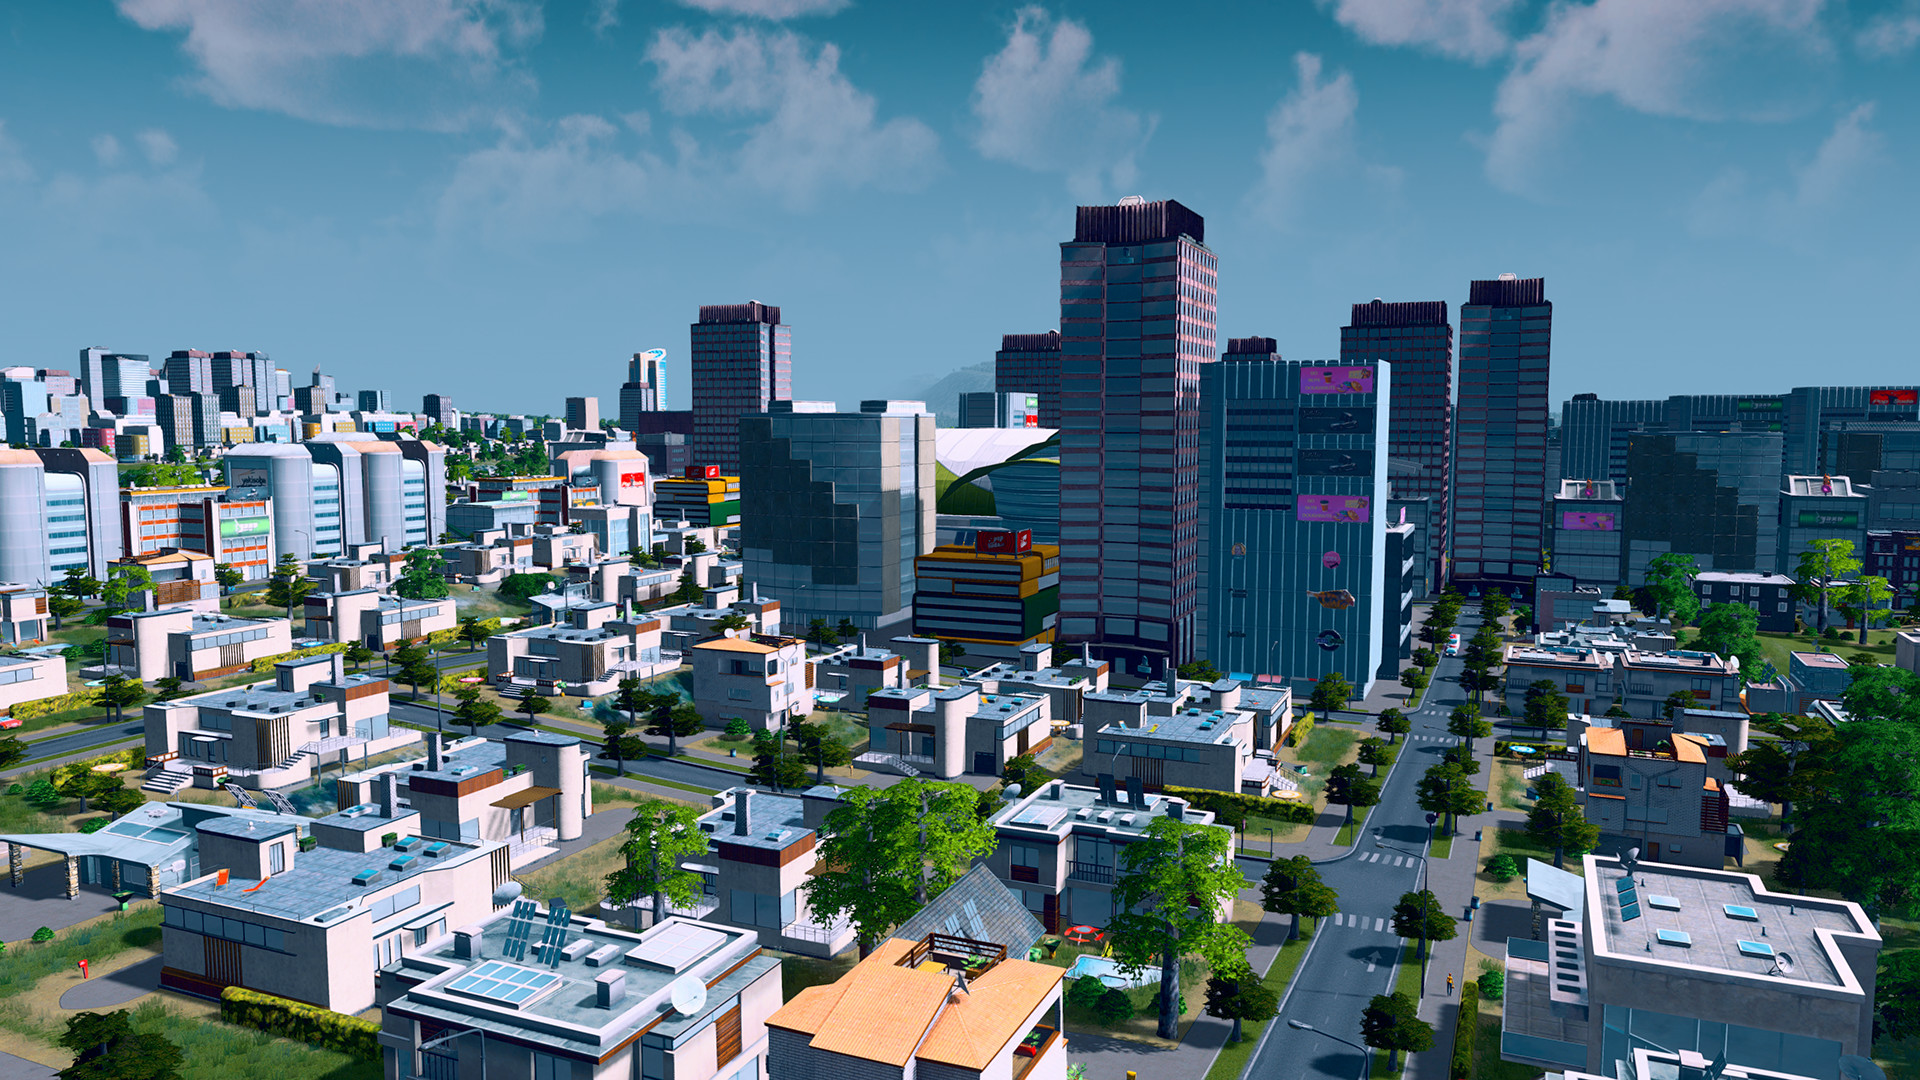 cities skylines with all dlc torrent